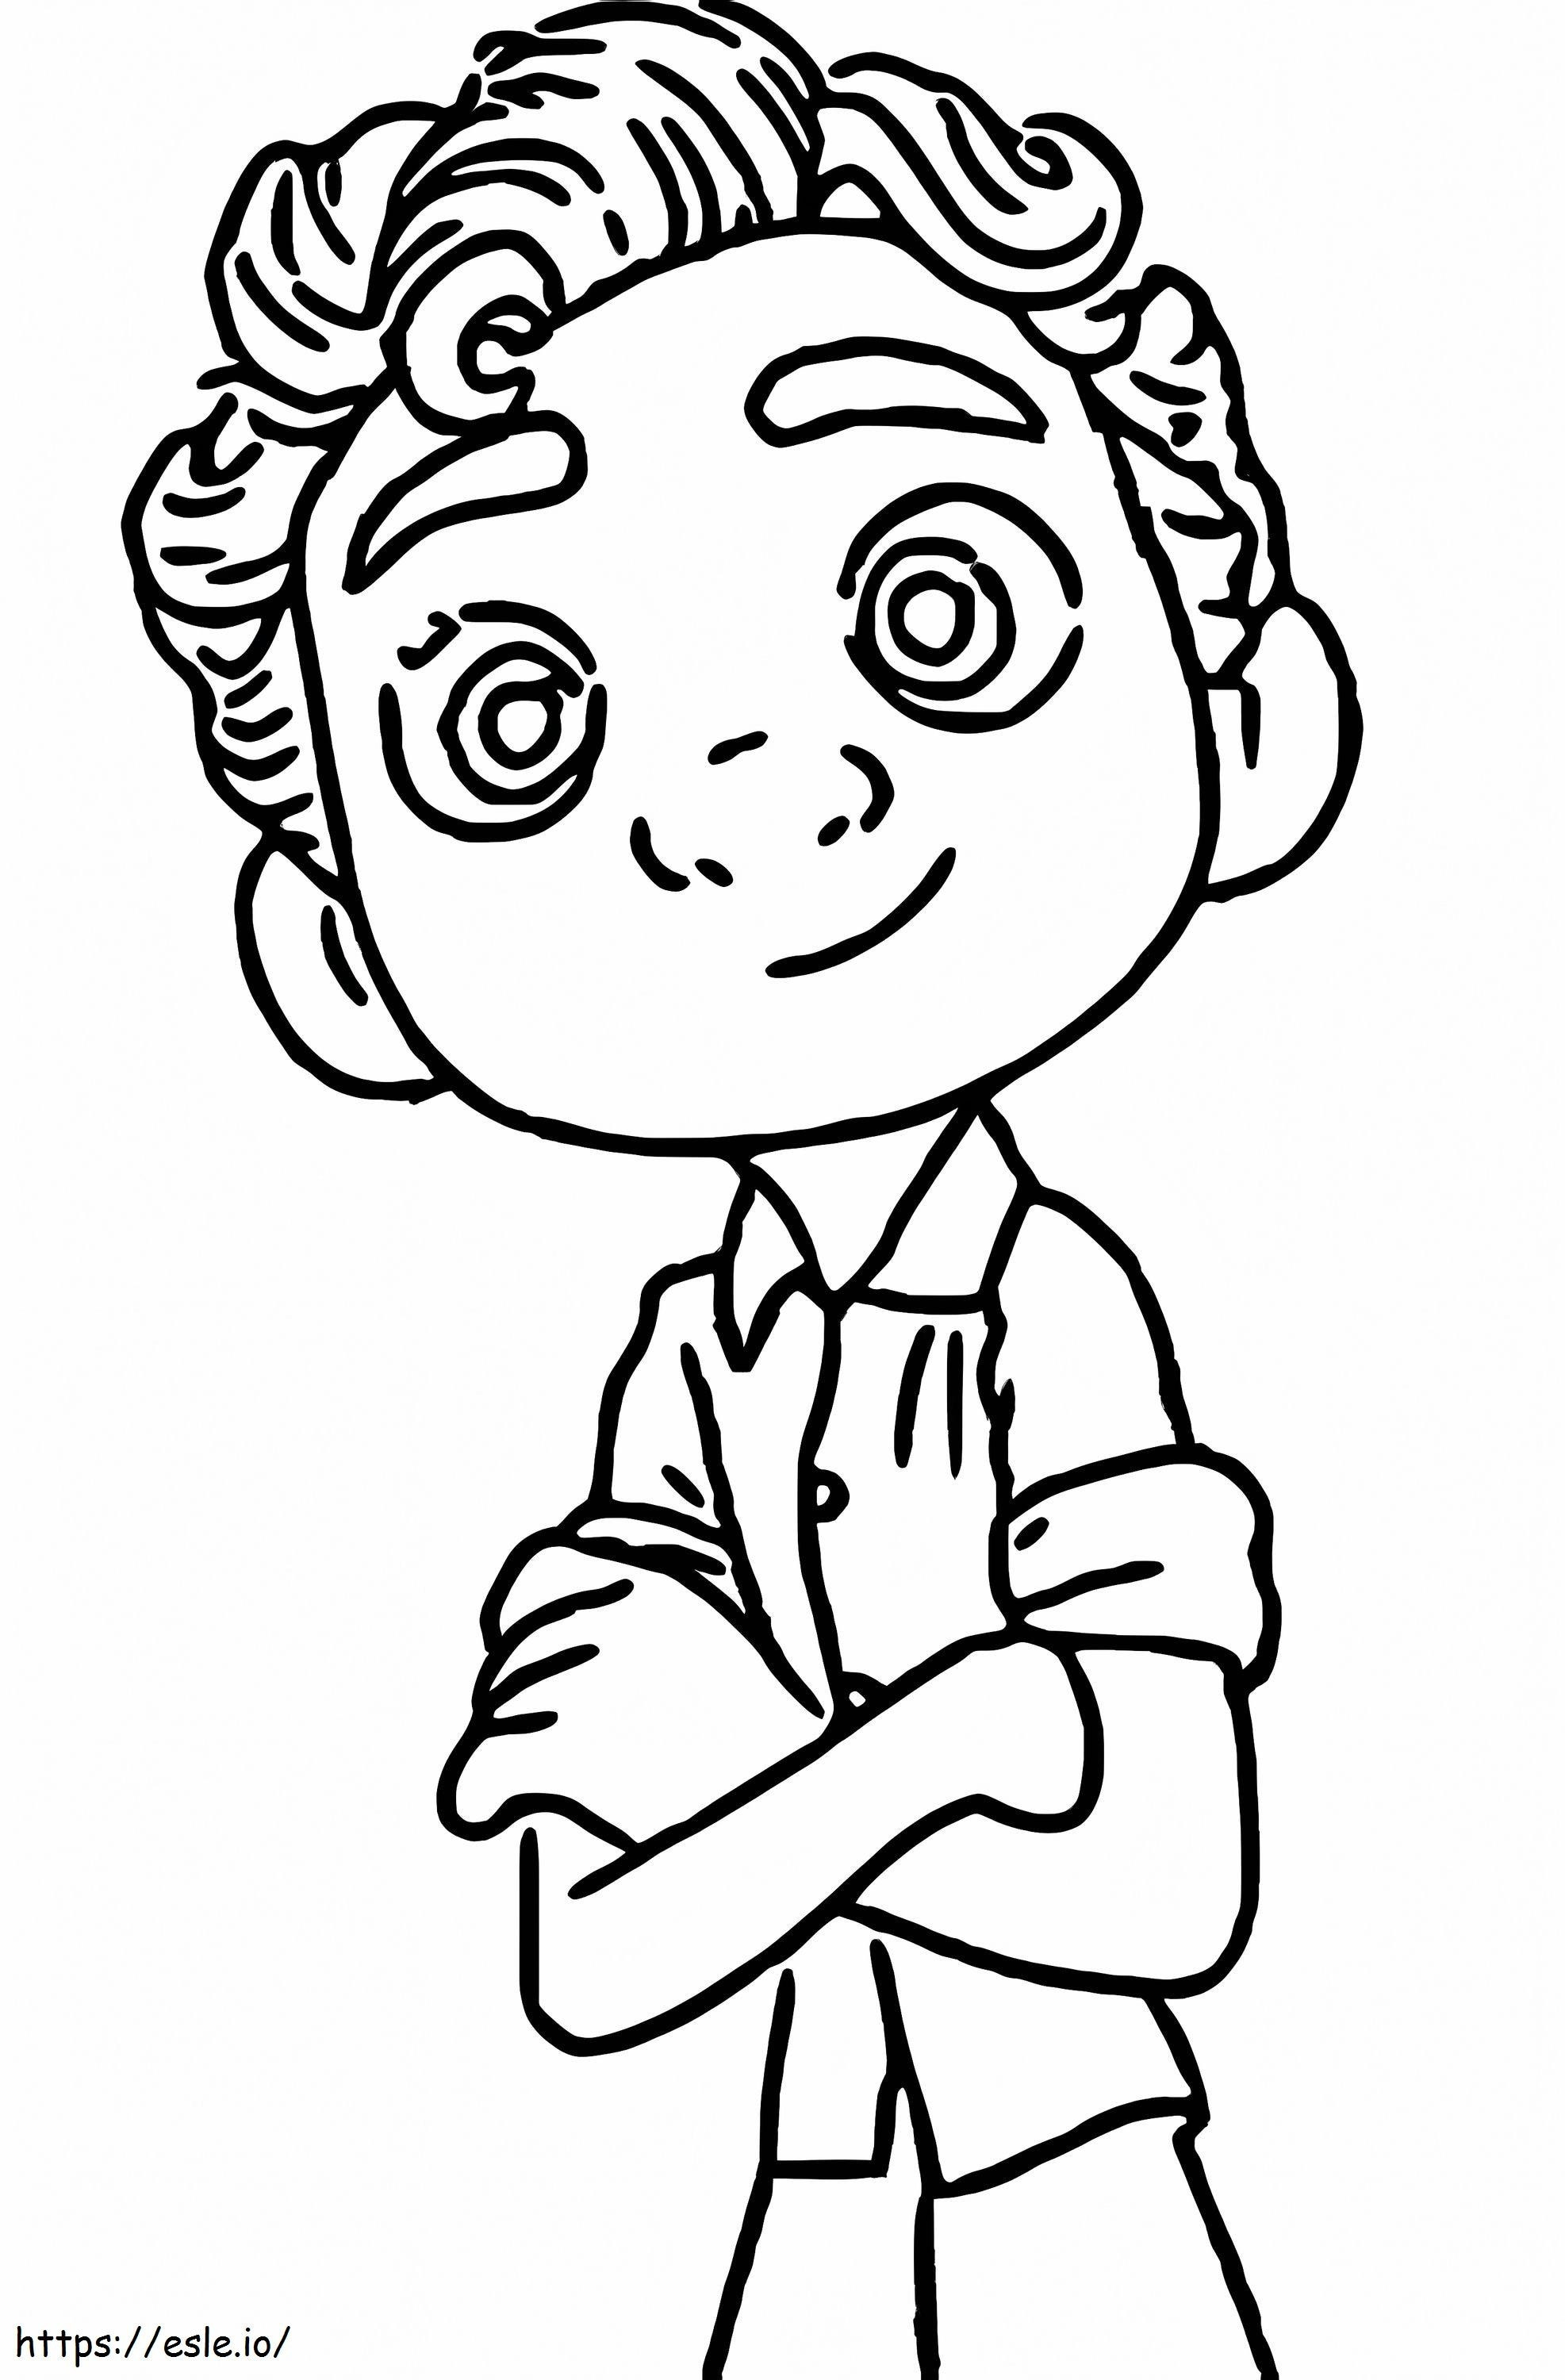 Luca Smiling coloring page